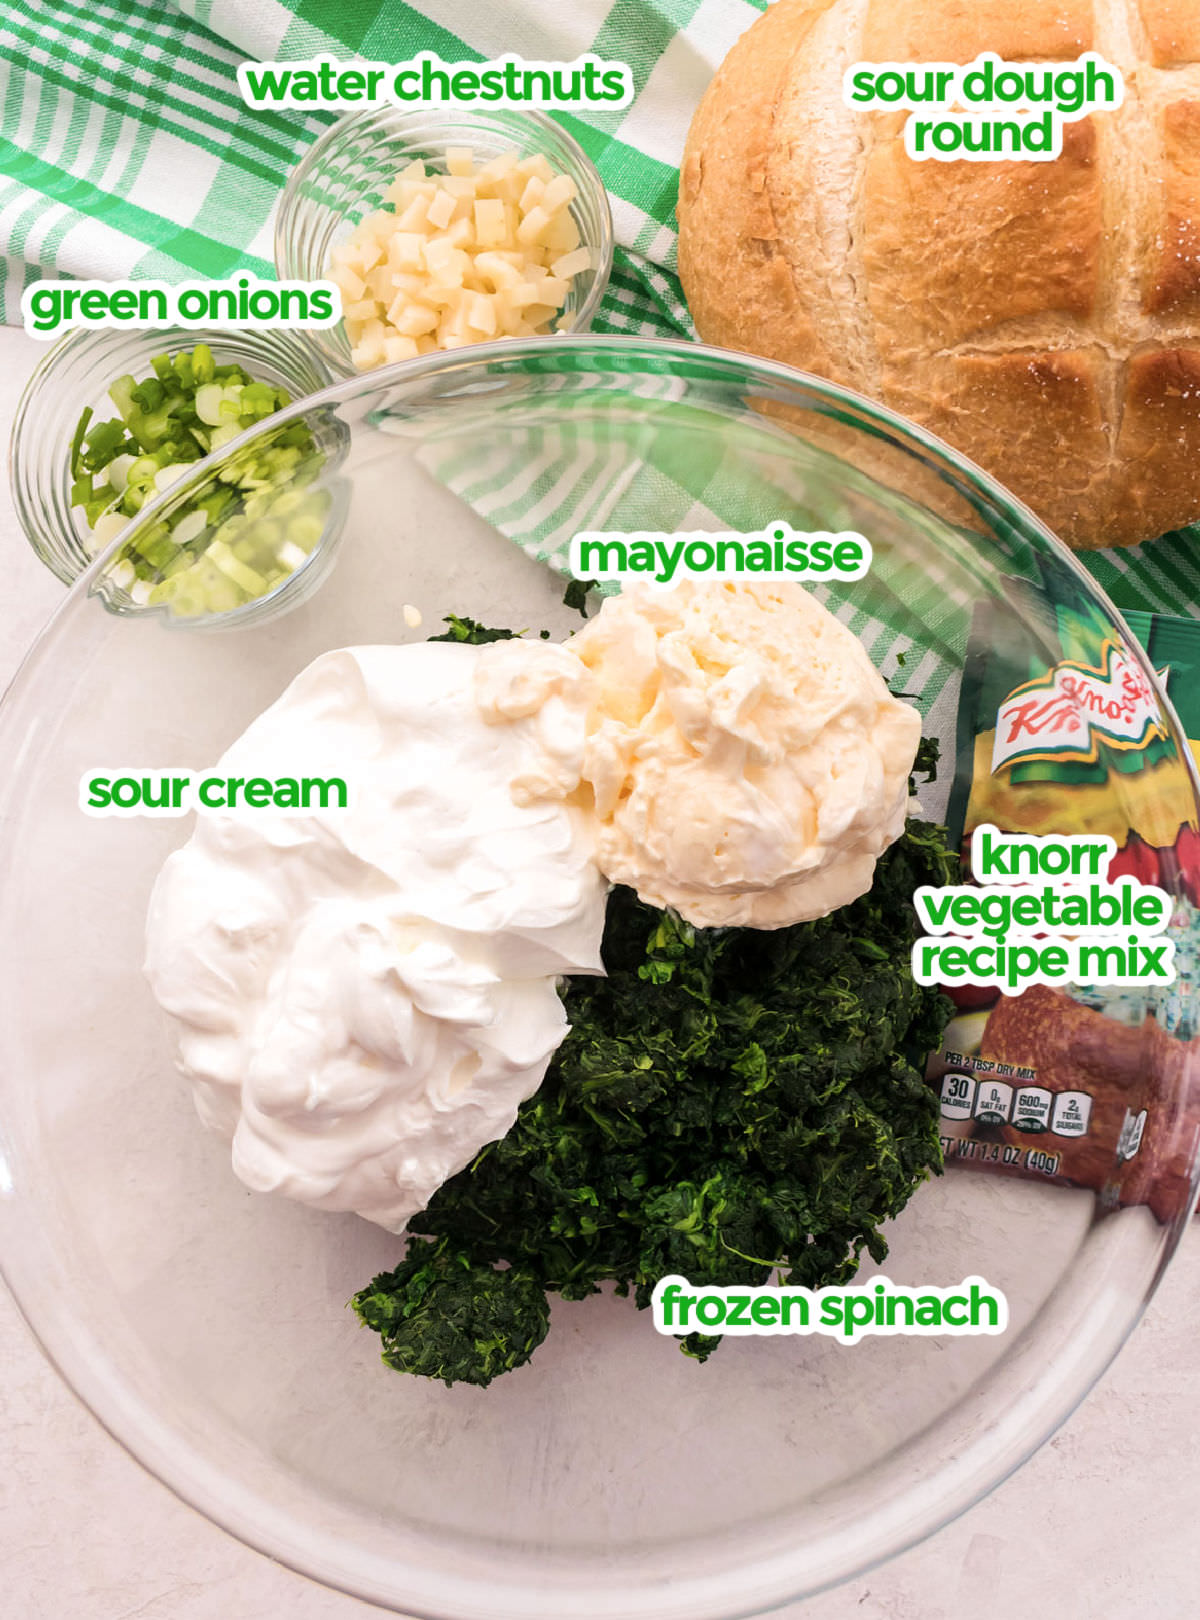 All the ingredients you will need to make Spinach Dip including frozen spinach, sour cream, mayonaisse, knorr vegetable recipe mix, green onions, watercress and a sourdough round.